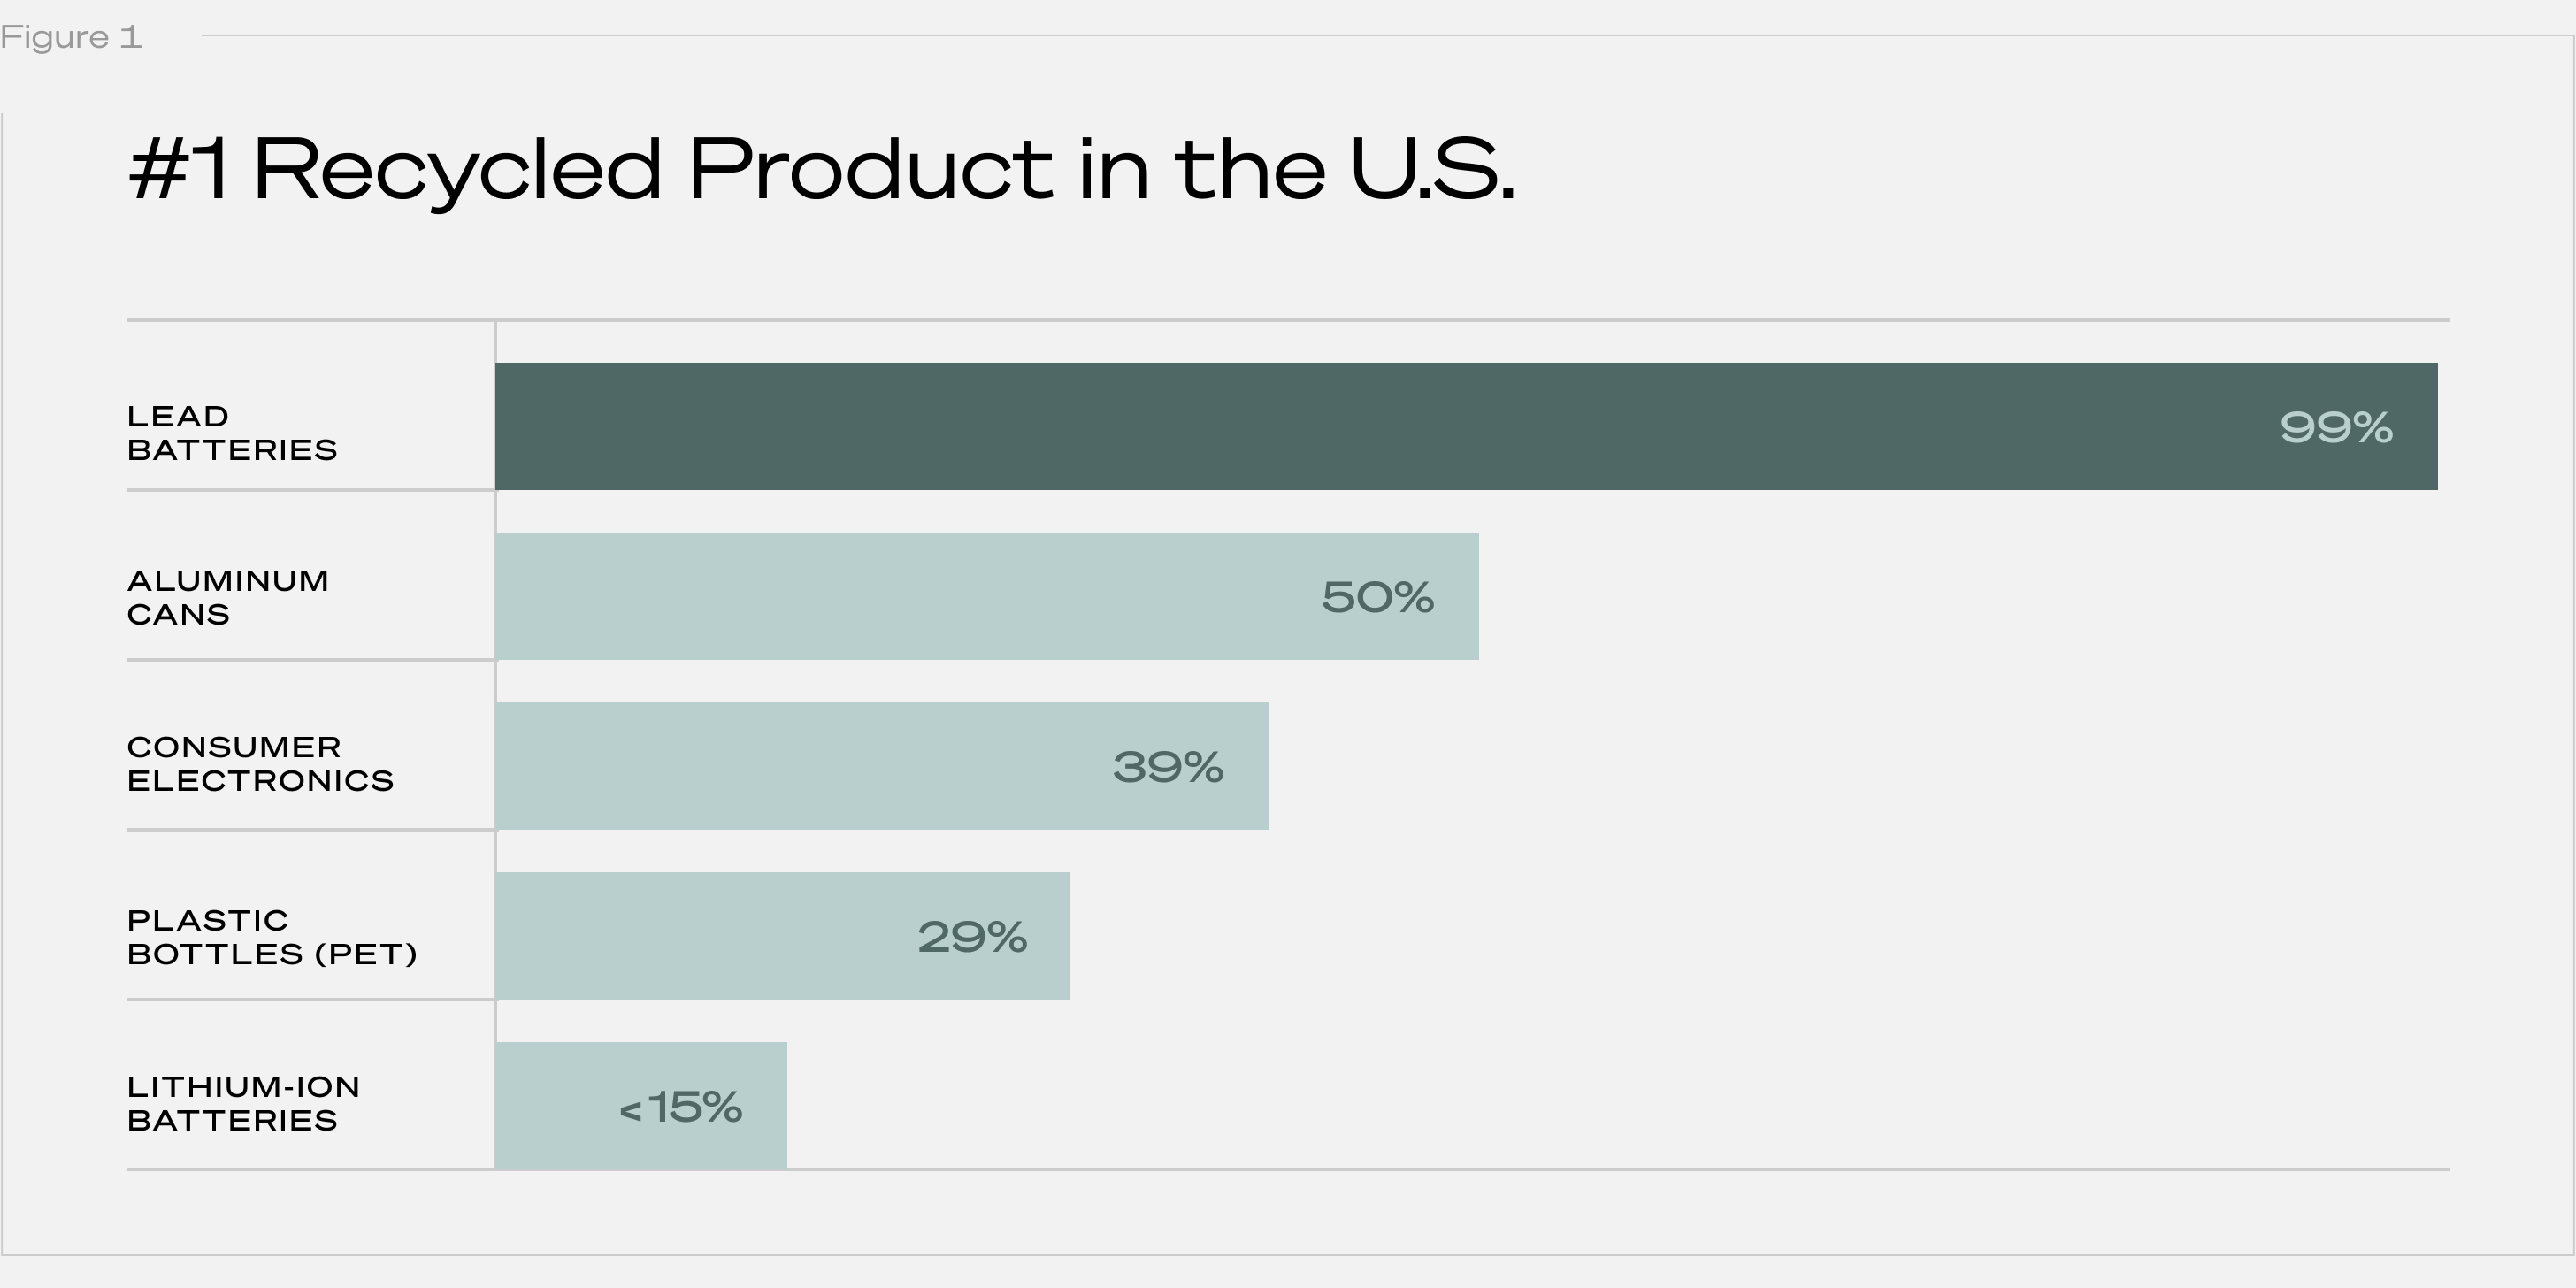 Chart of top recycled products in the United States, with lead-acid batteries at the top at 99%